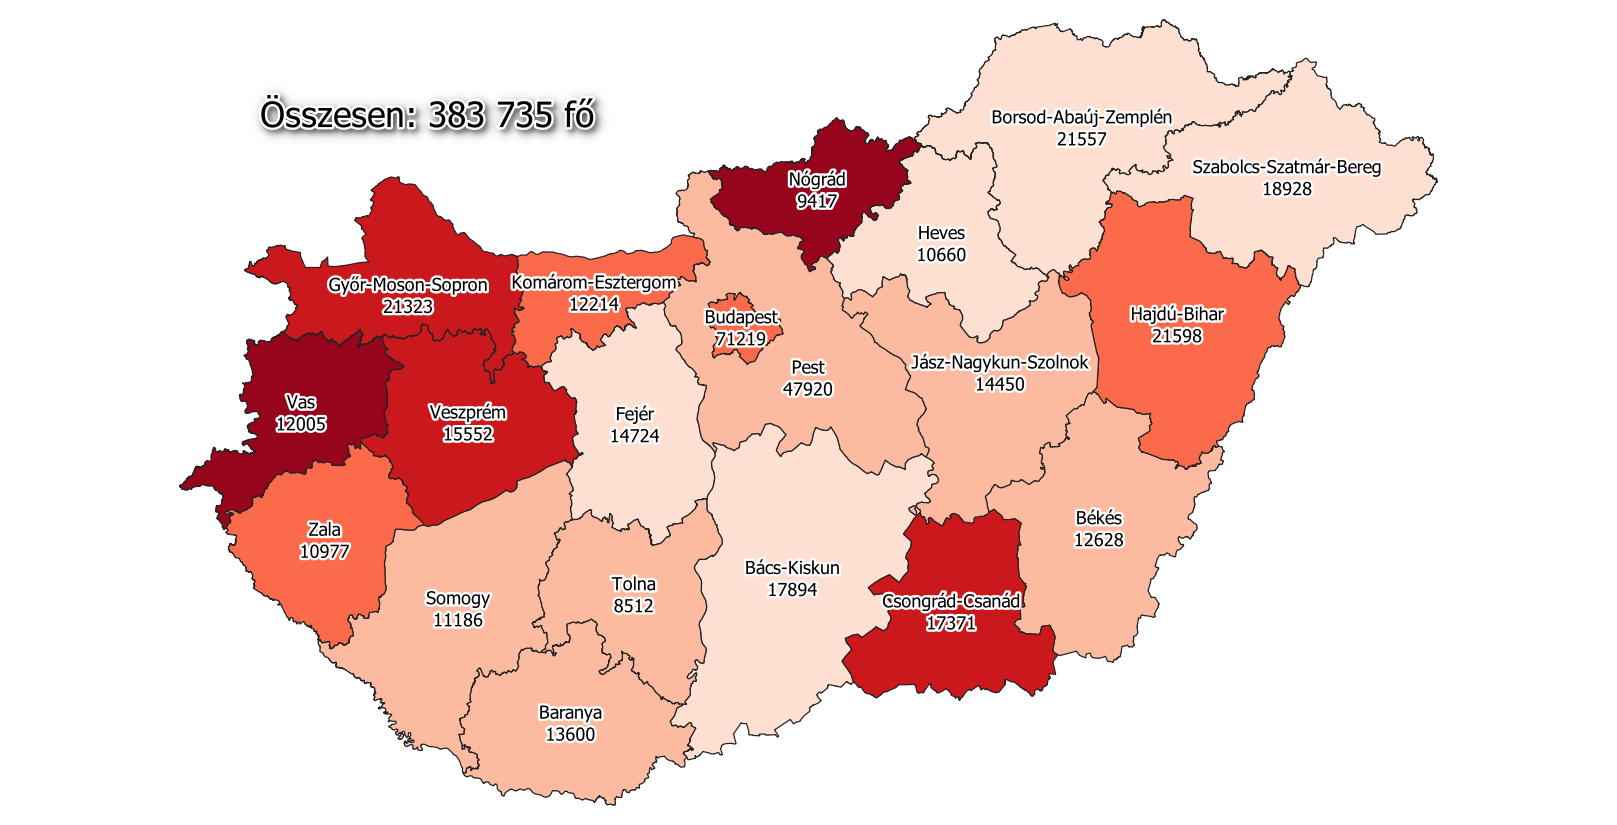 Covid Update: 'Indicators Of The Epidemic In Hungary Are Still Rising'